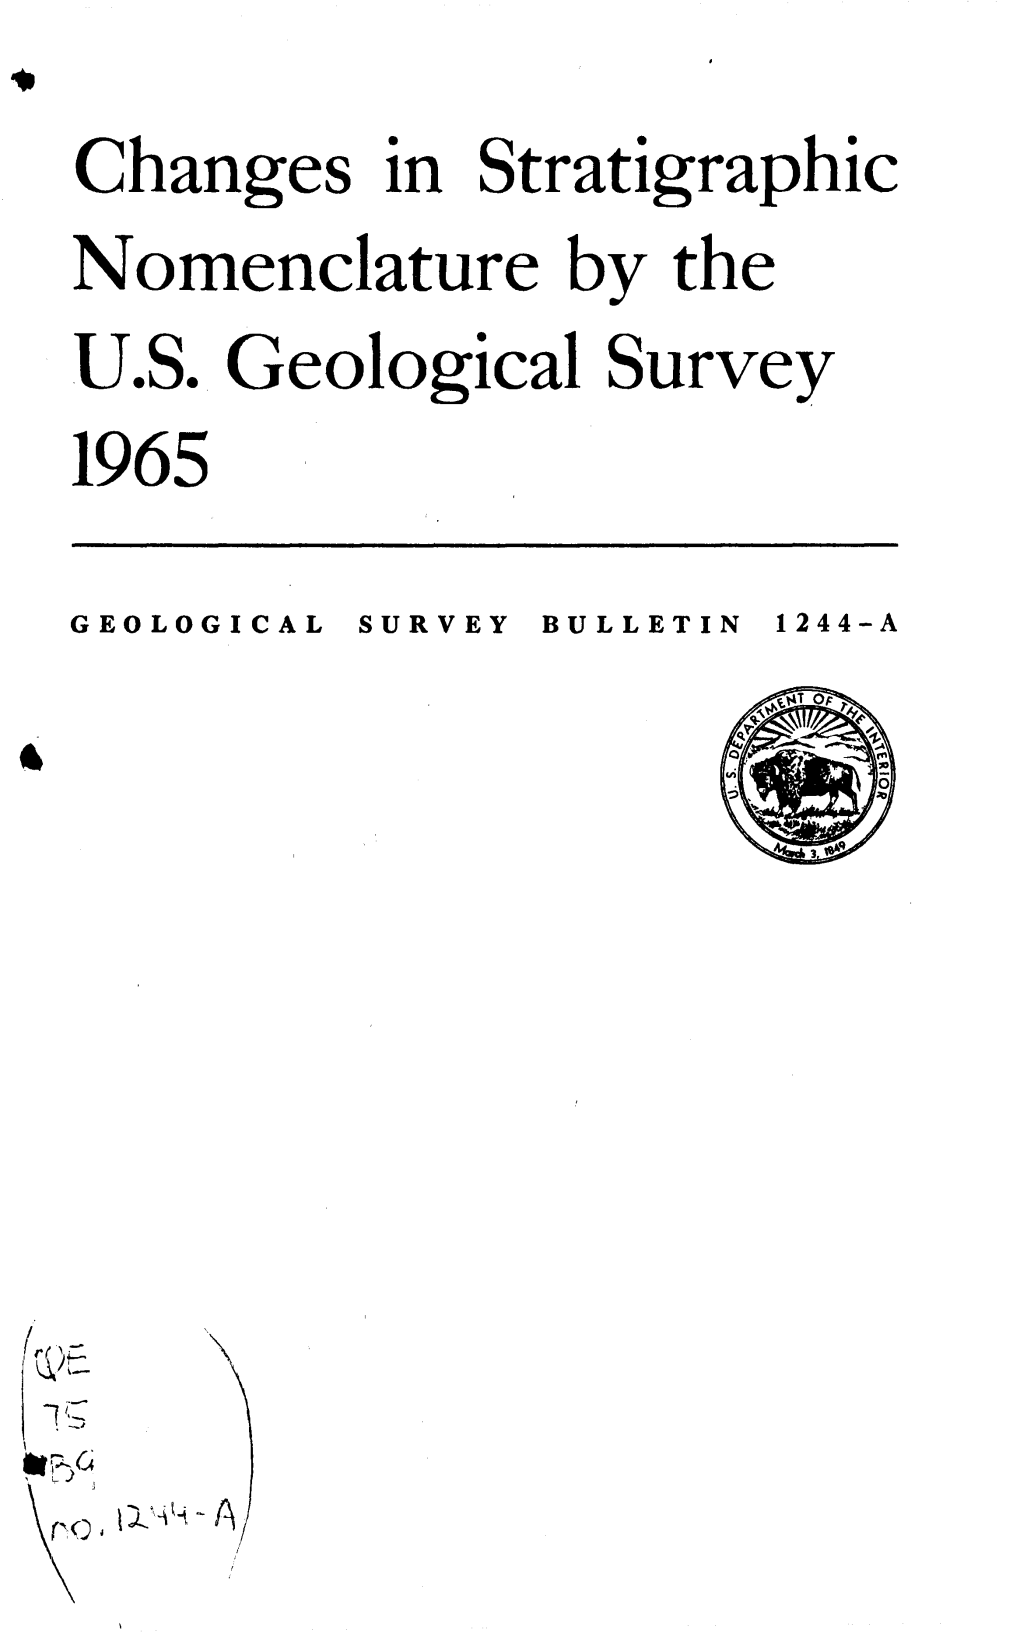 Changes in Stratigraphic Nomenclature by the U.S. Geological Survey 1965